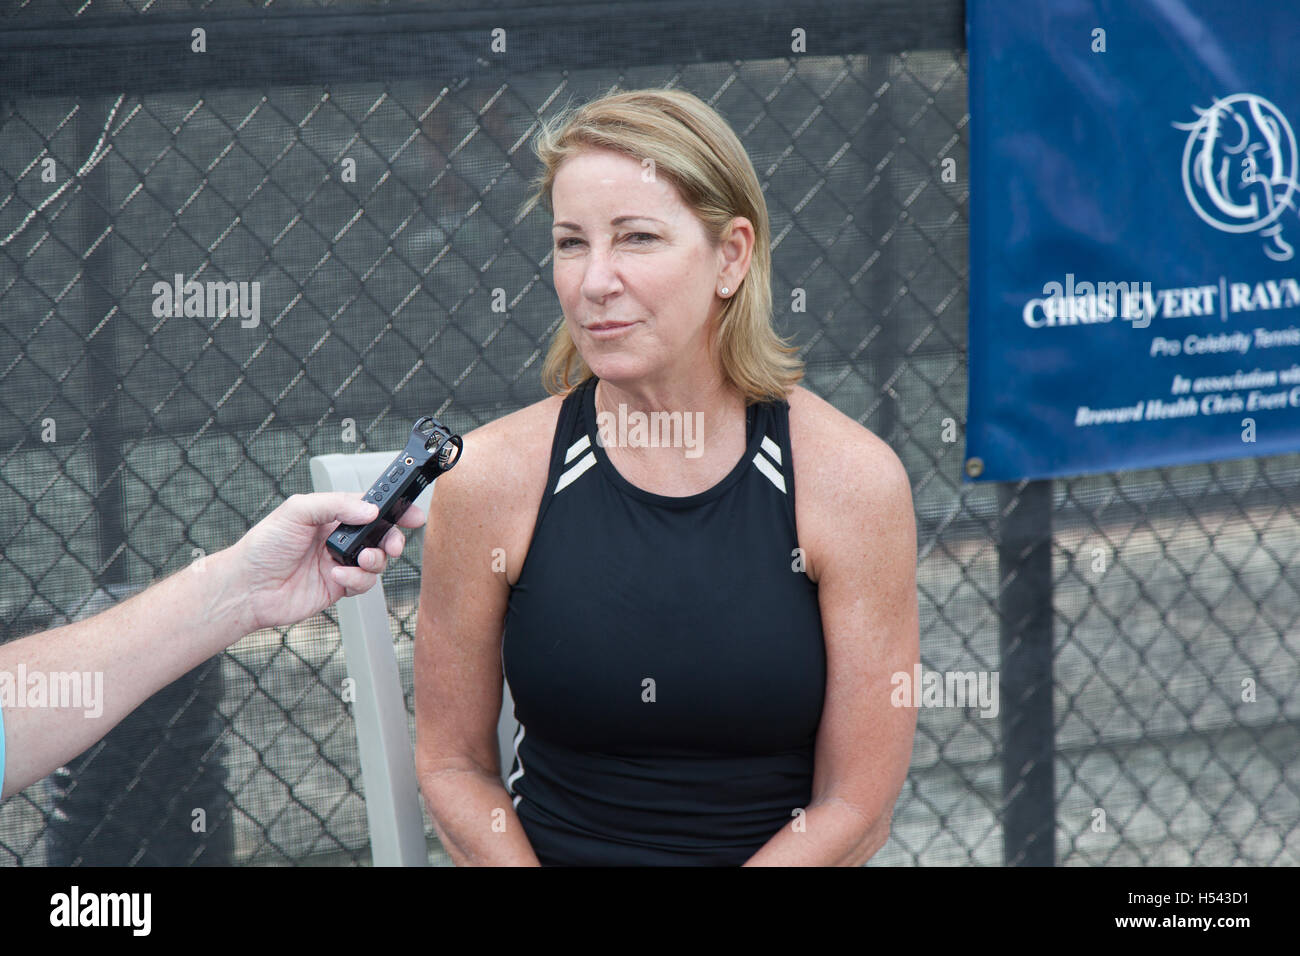 Chris Evert speaking with reporter at the Chris Evert Pro-Am Celebrity Tennis Classic on November 20, 2015 at the Boca Raton Resort & Club in Boca Raton, Florida Stock Photo